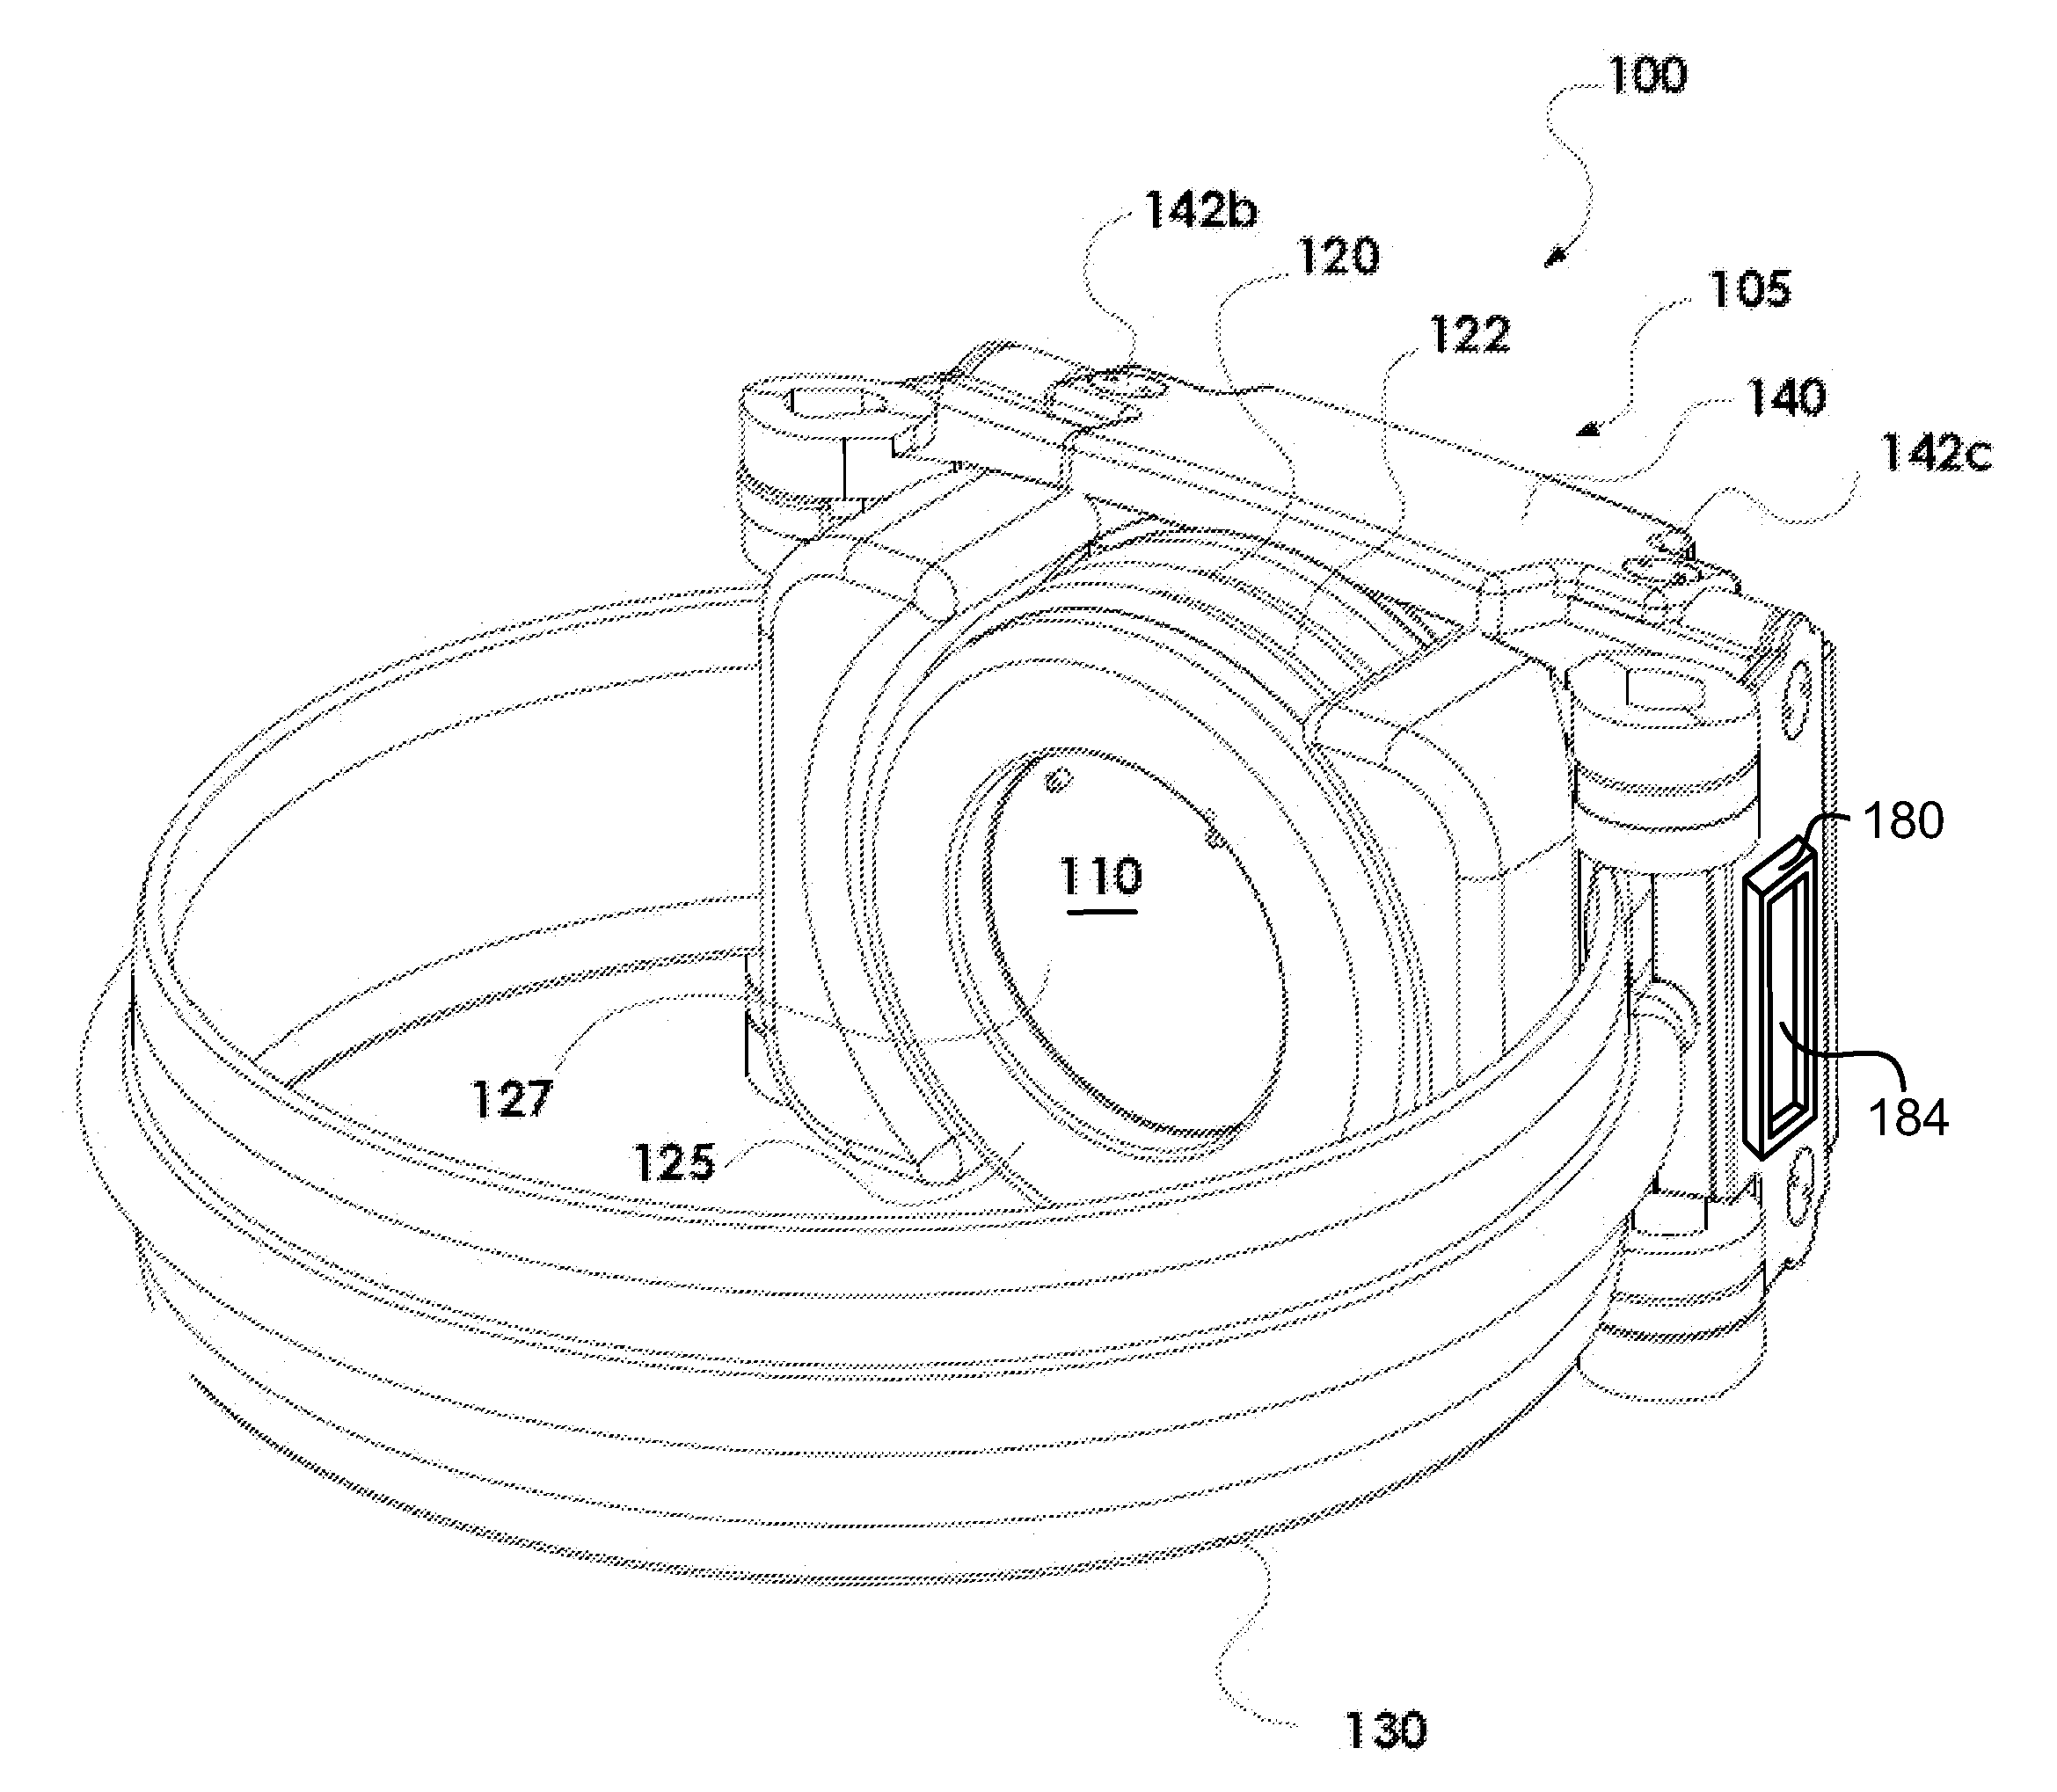 Systems and Methods for Alcohol Consumption Monitoring